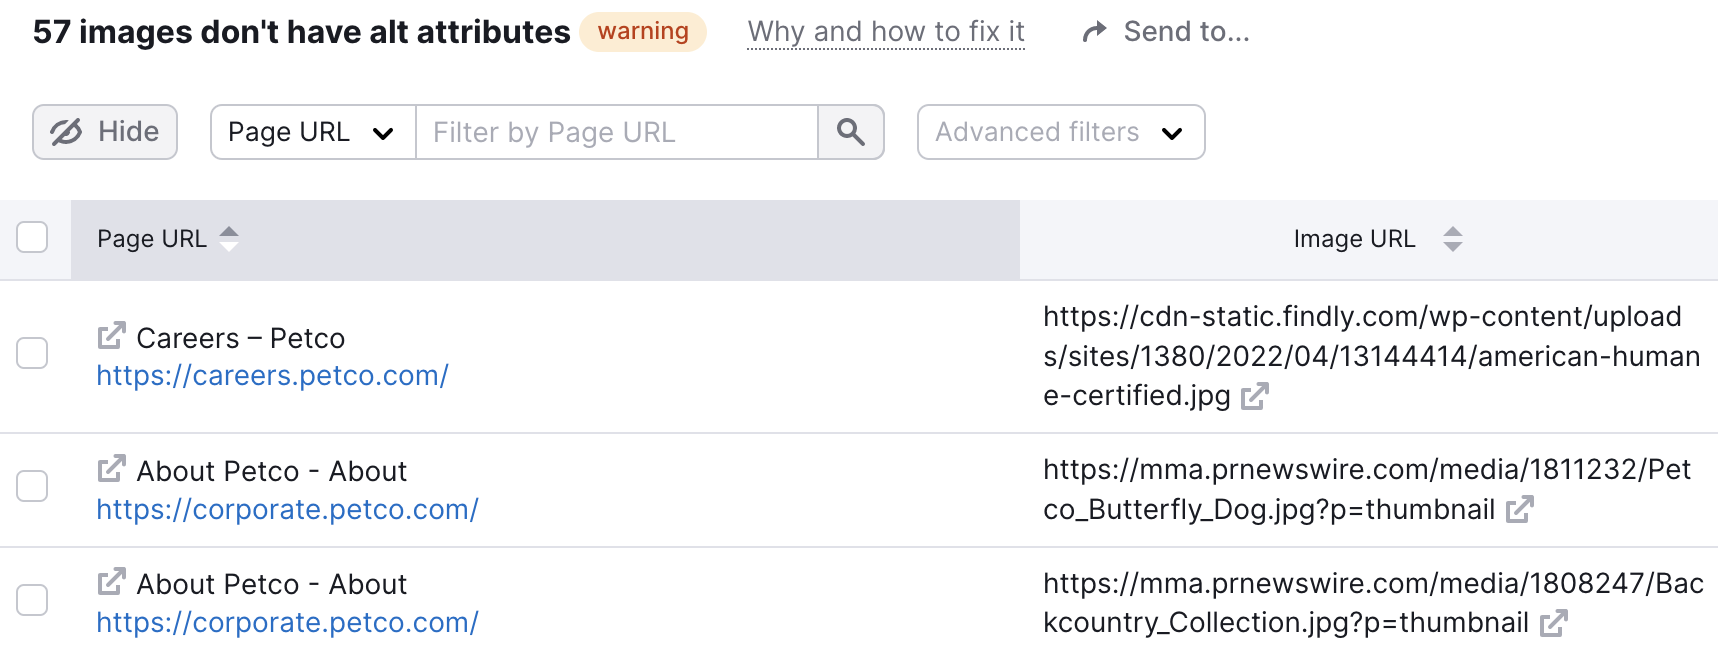 Pages with missing alt attributes in Site Audit